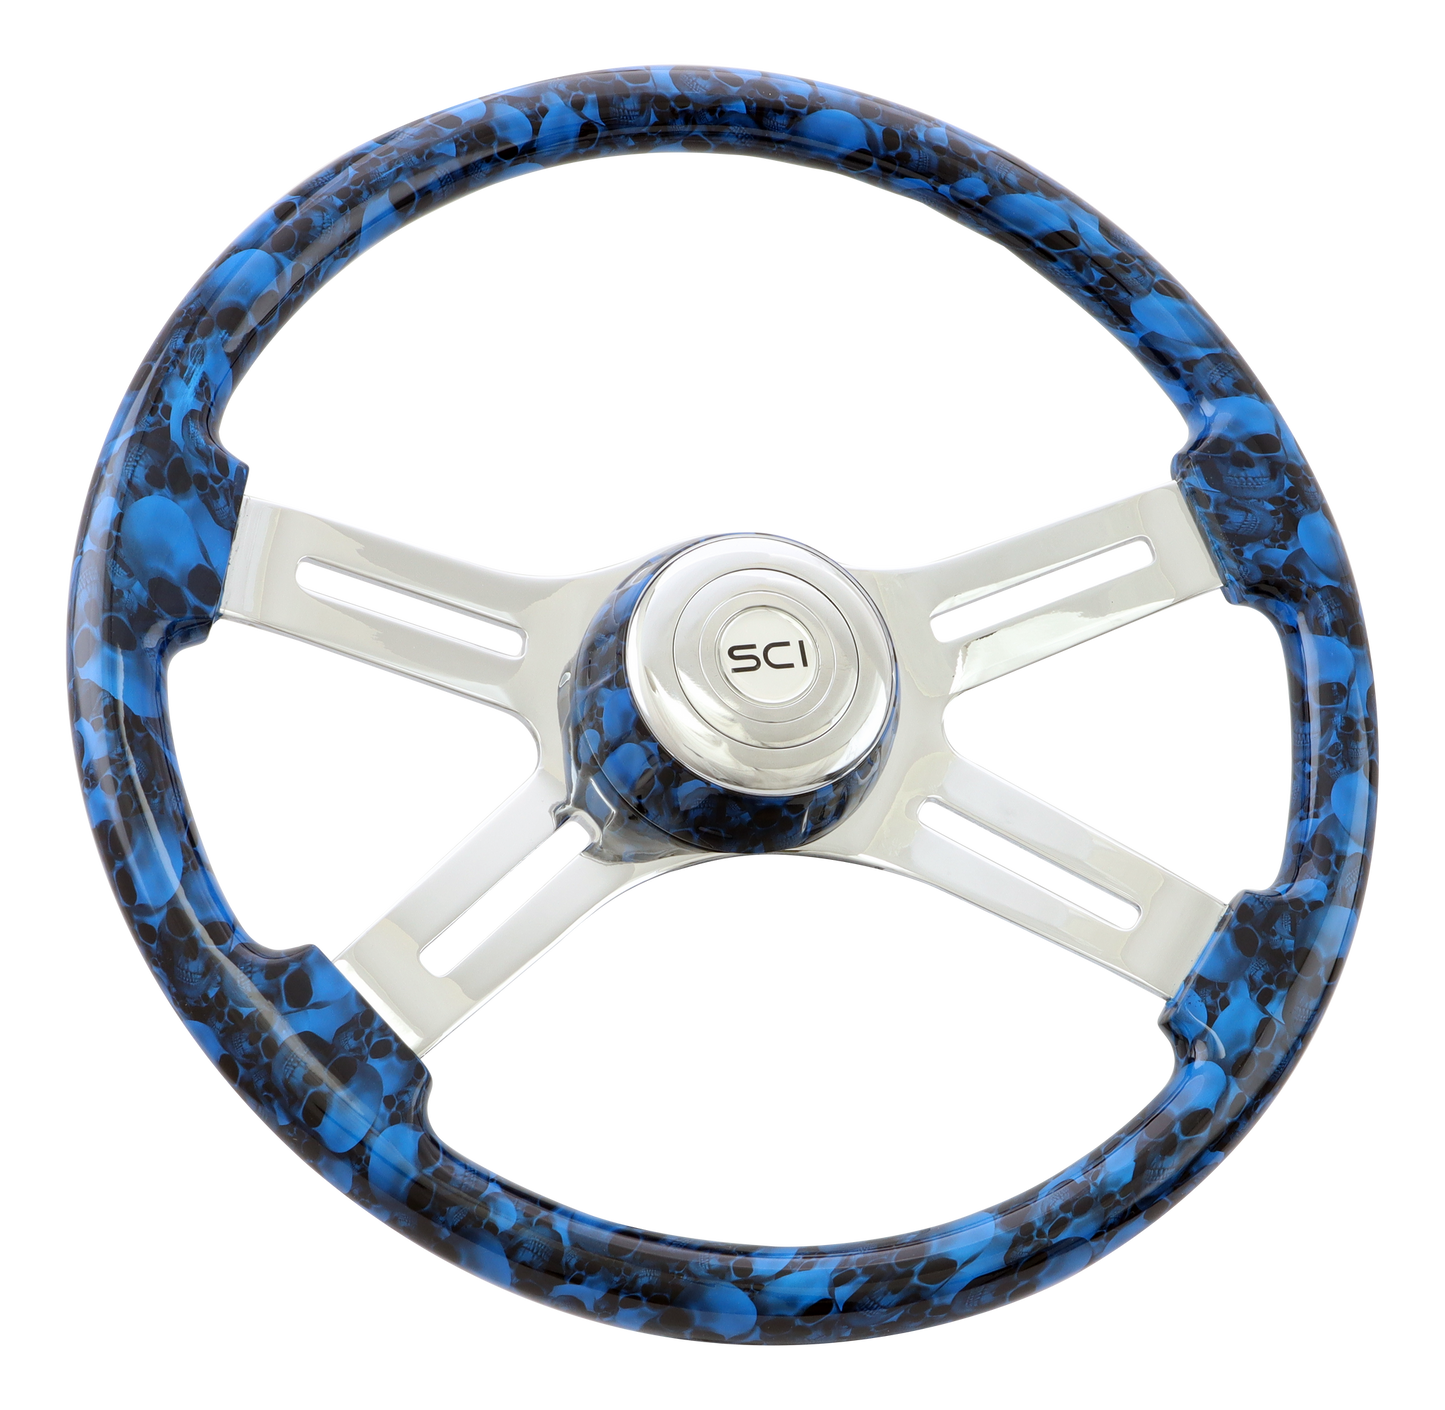 Big Skulls Blue - 18" Printed Wood Rim, Chrome 4-Spoke w/Slot Cut Outs Steering Wheel, Matching Bezel, Chrome Horn Button - Logo
This wheel requires a hub kit from the 800 Series (3-hole).